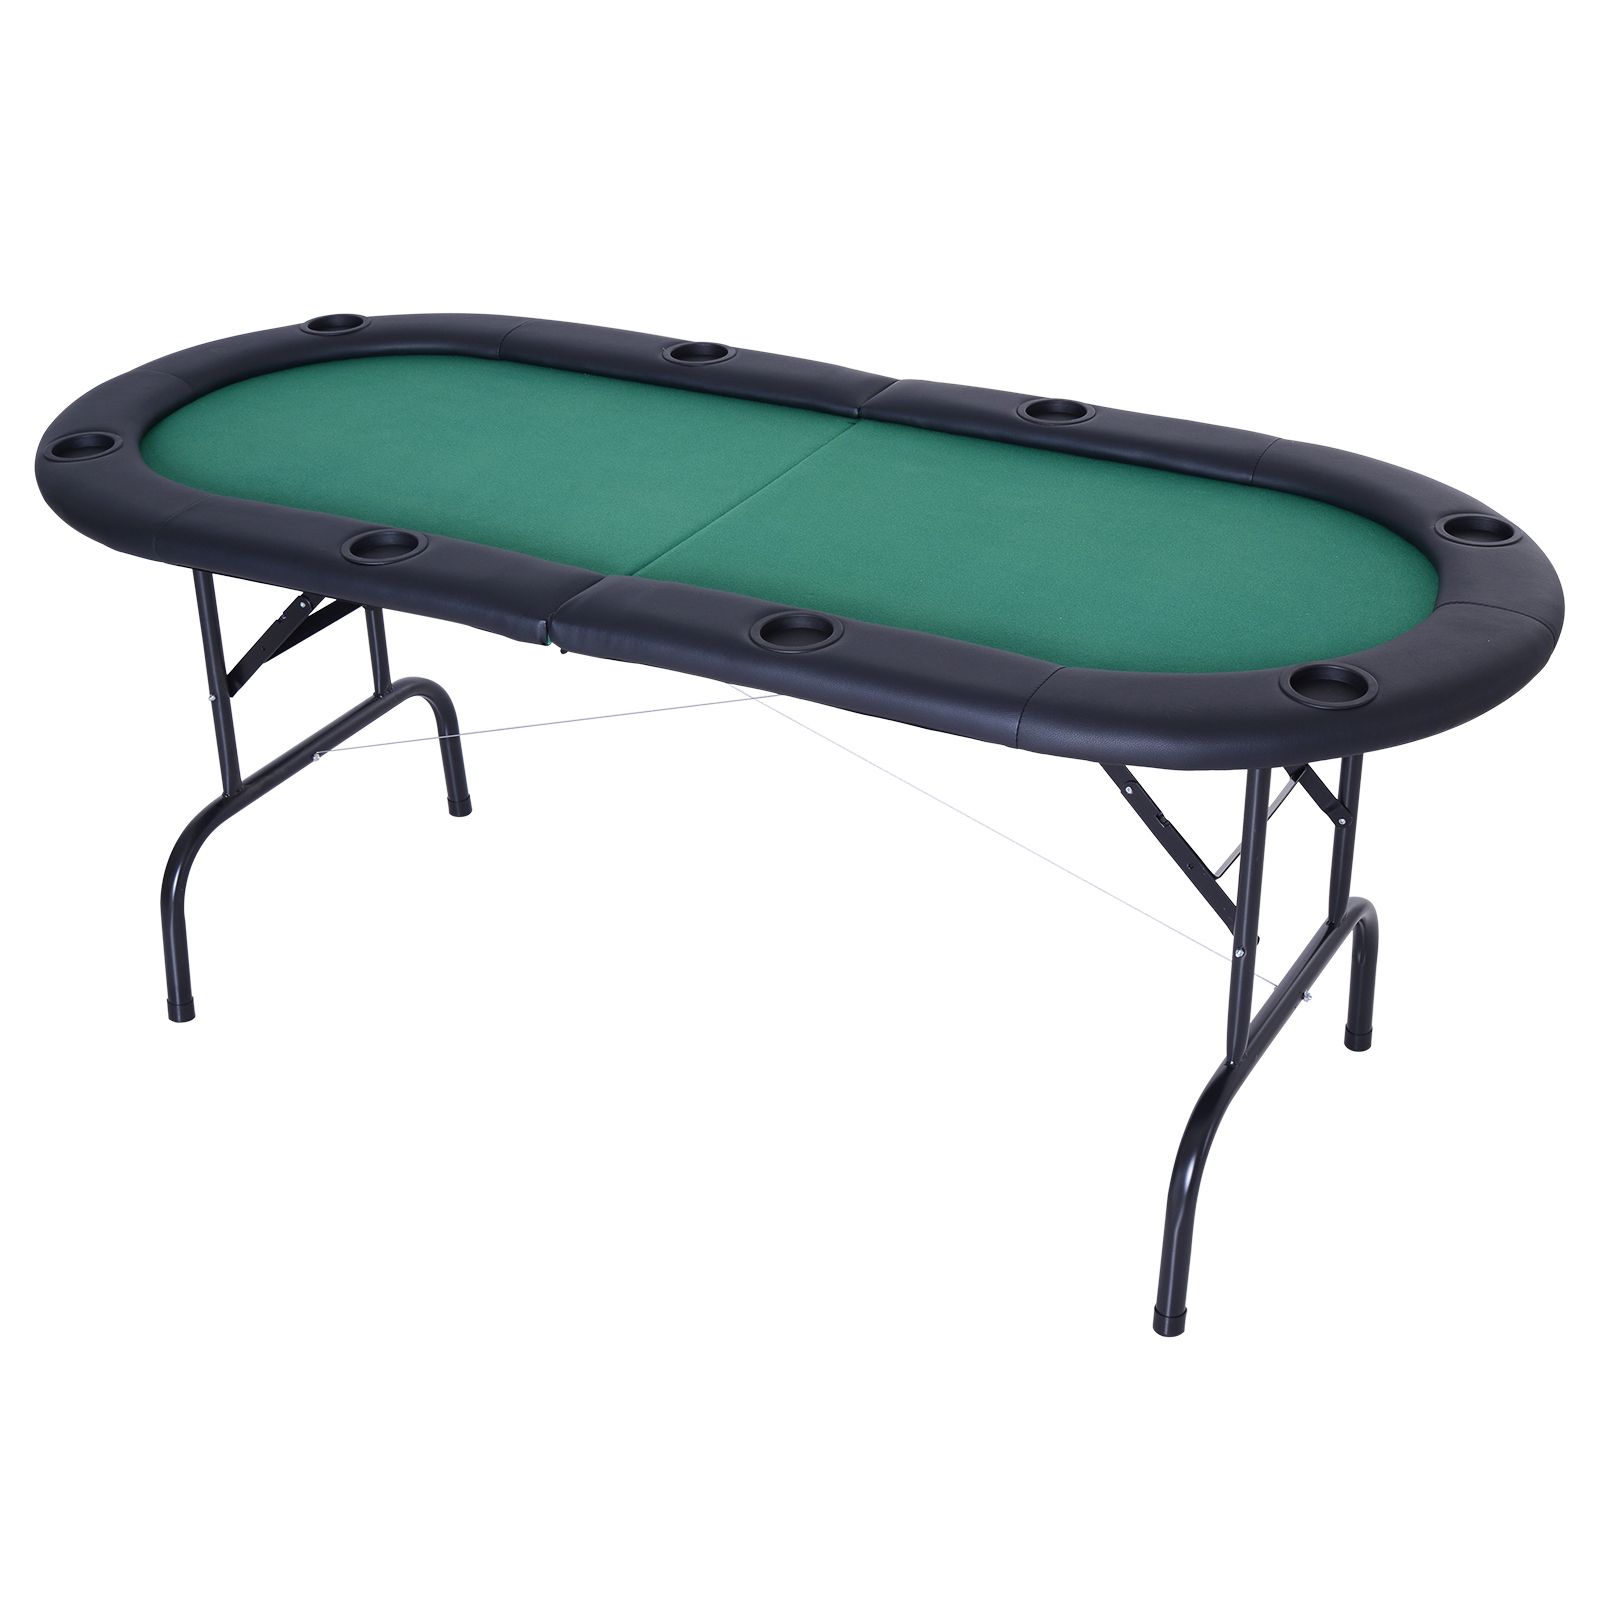 Soozier 72" 8 Player Octagon Poker Table Set With 8 Steel Pertaining To Preferred 48" 6 – Player Poker Tables (View 12 of 20)